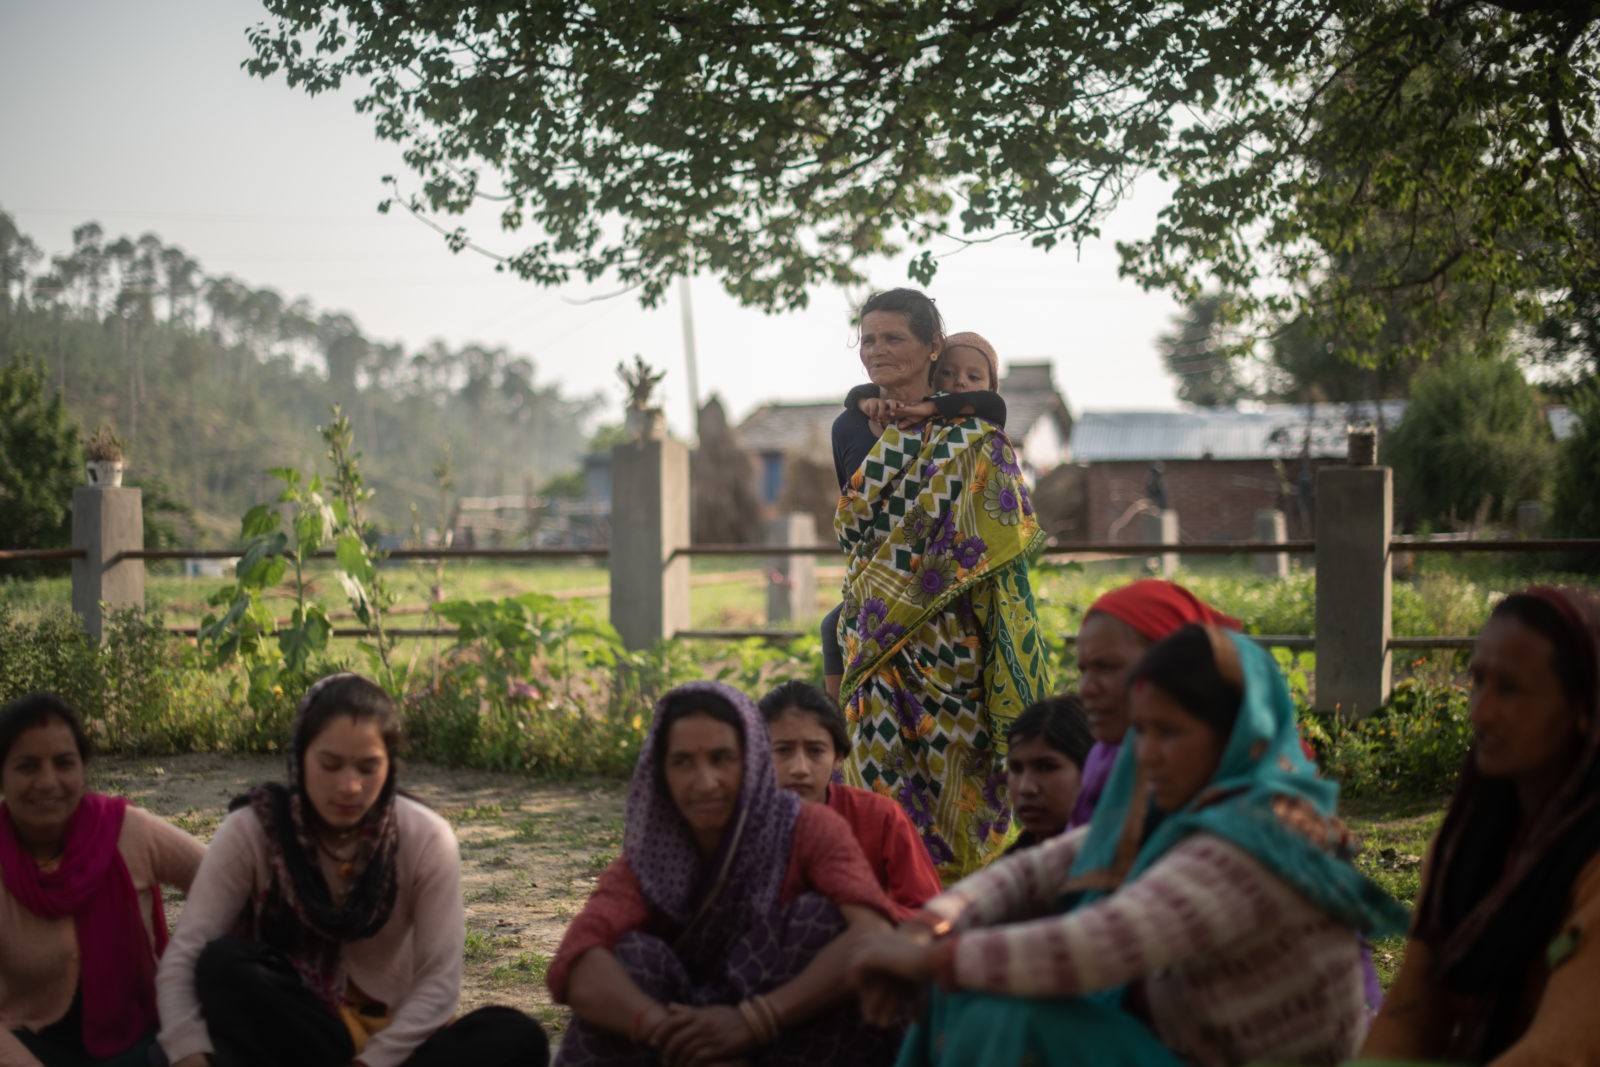 A group of women sit together on the ground in their village.